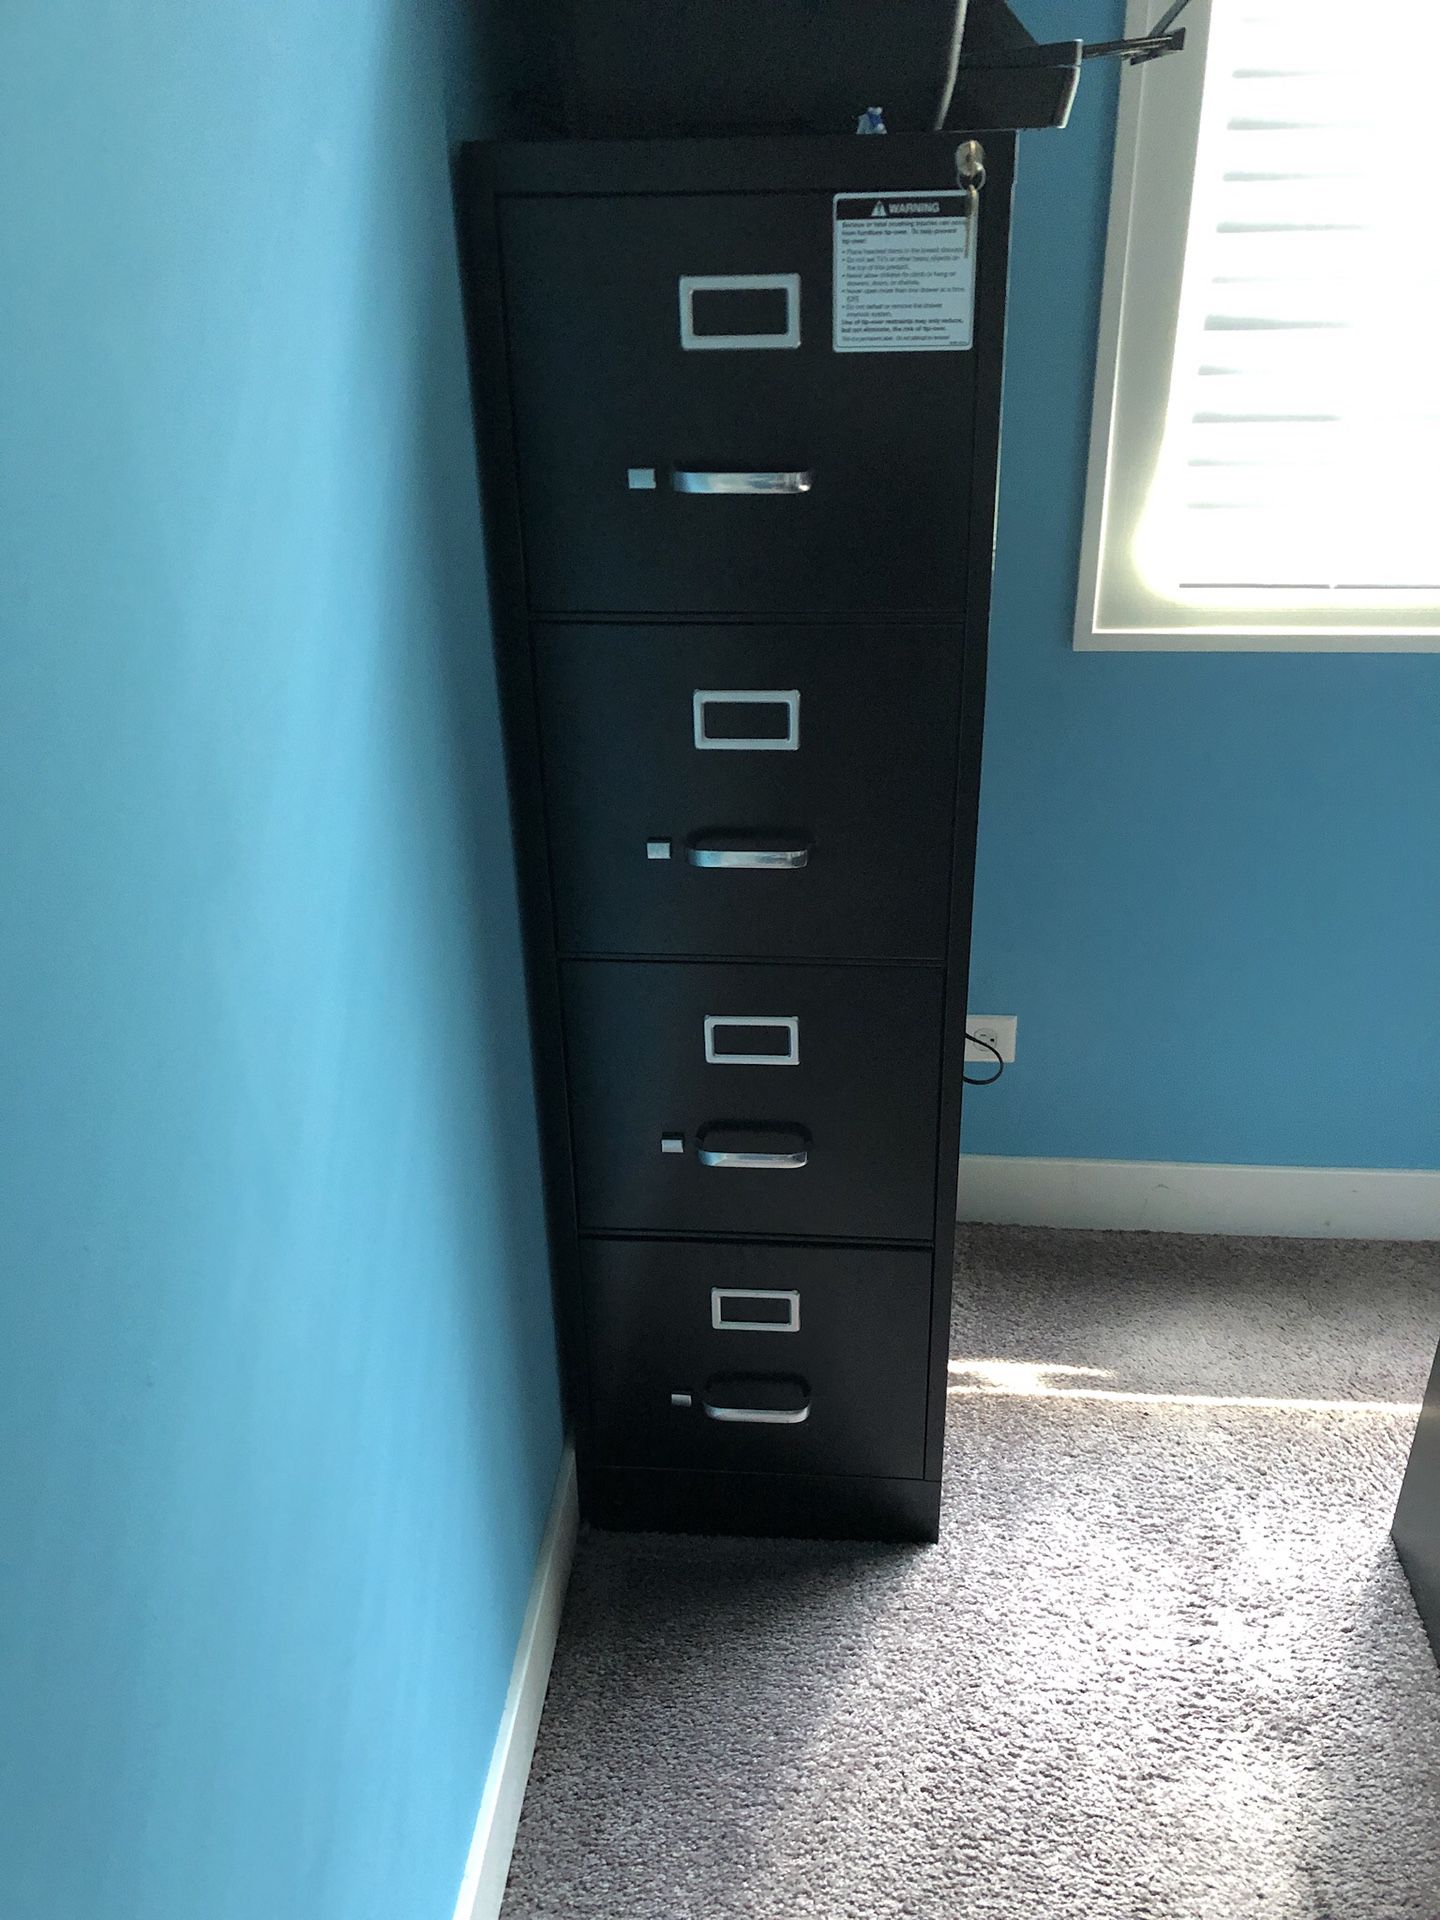 4-Drawer File Cabinet- Excellent Condition $60